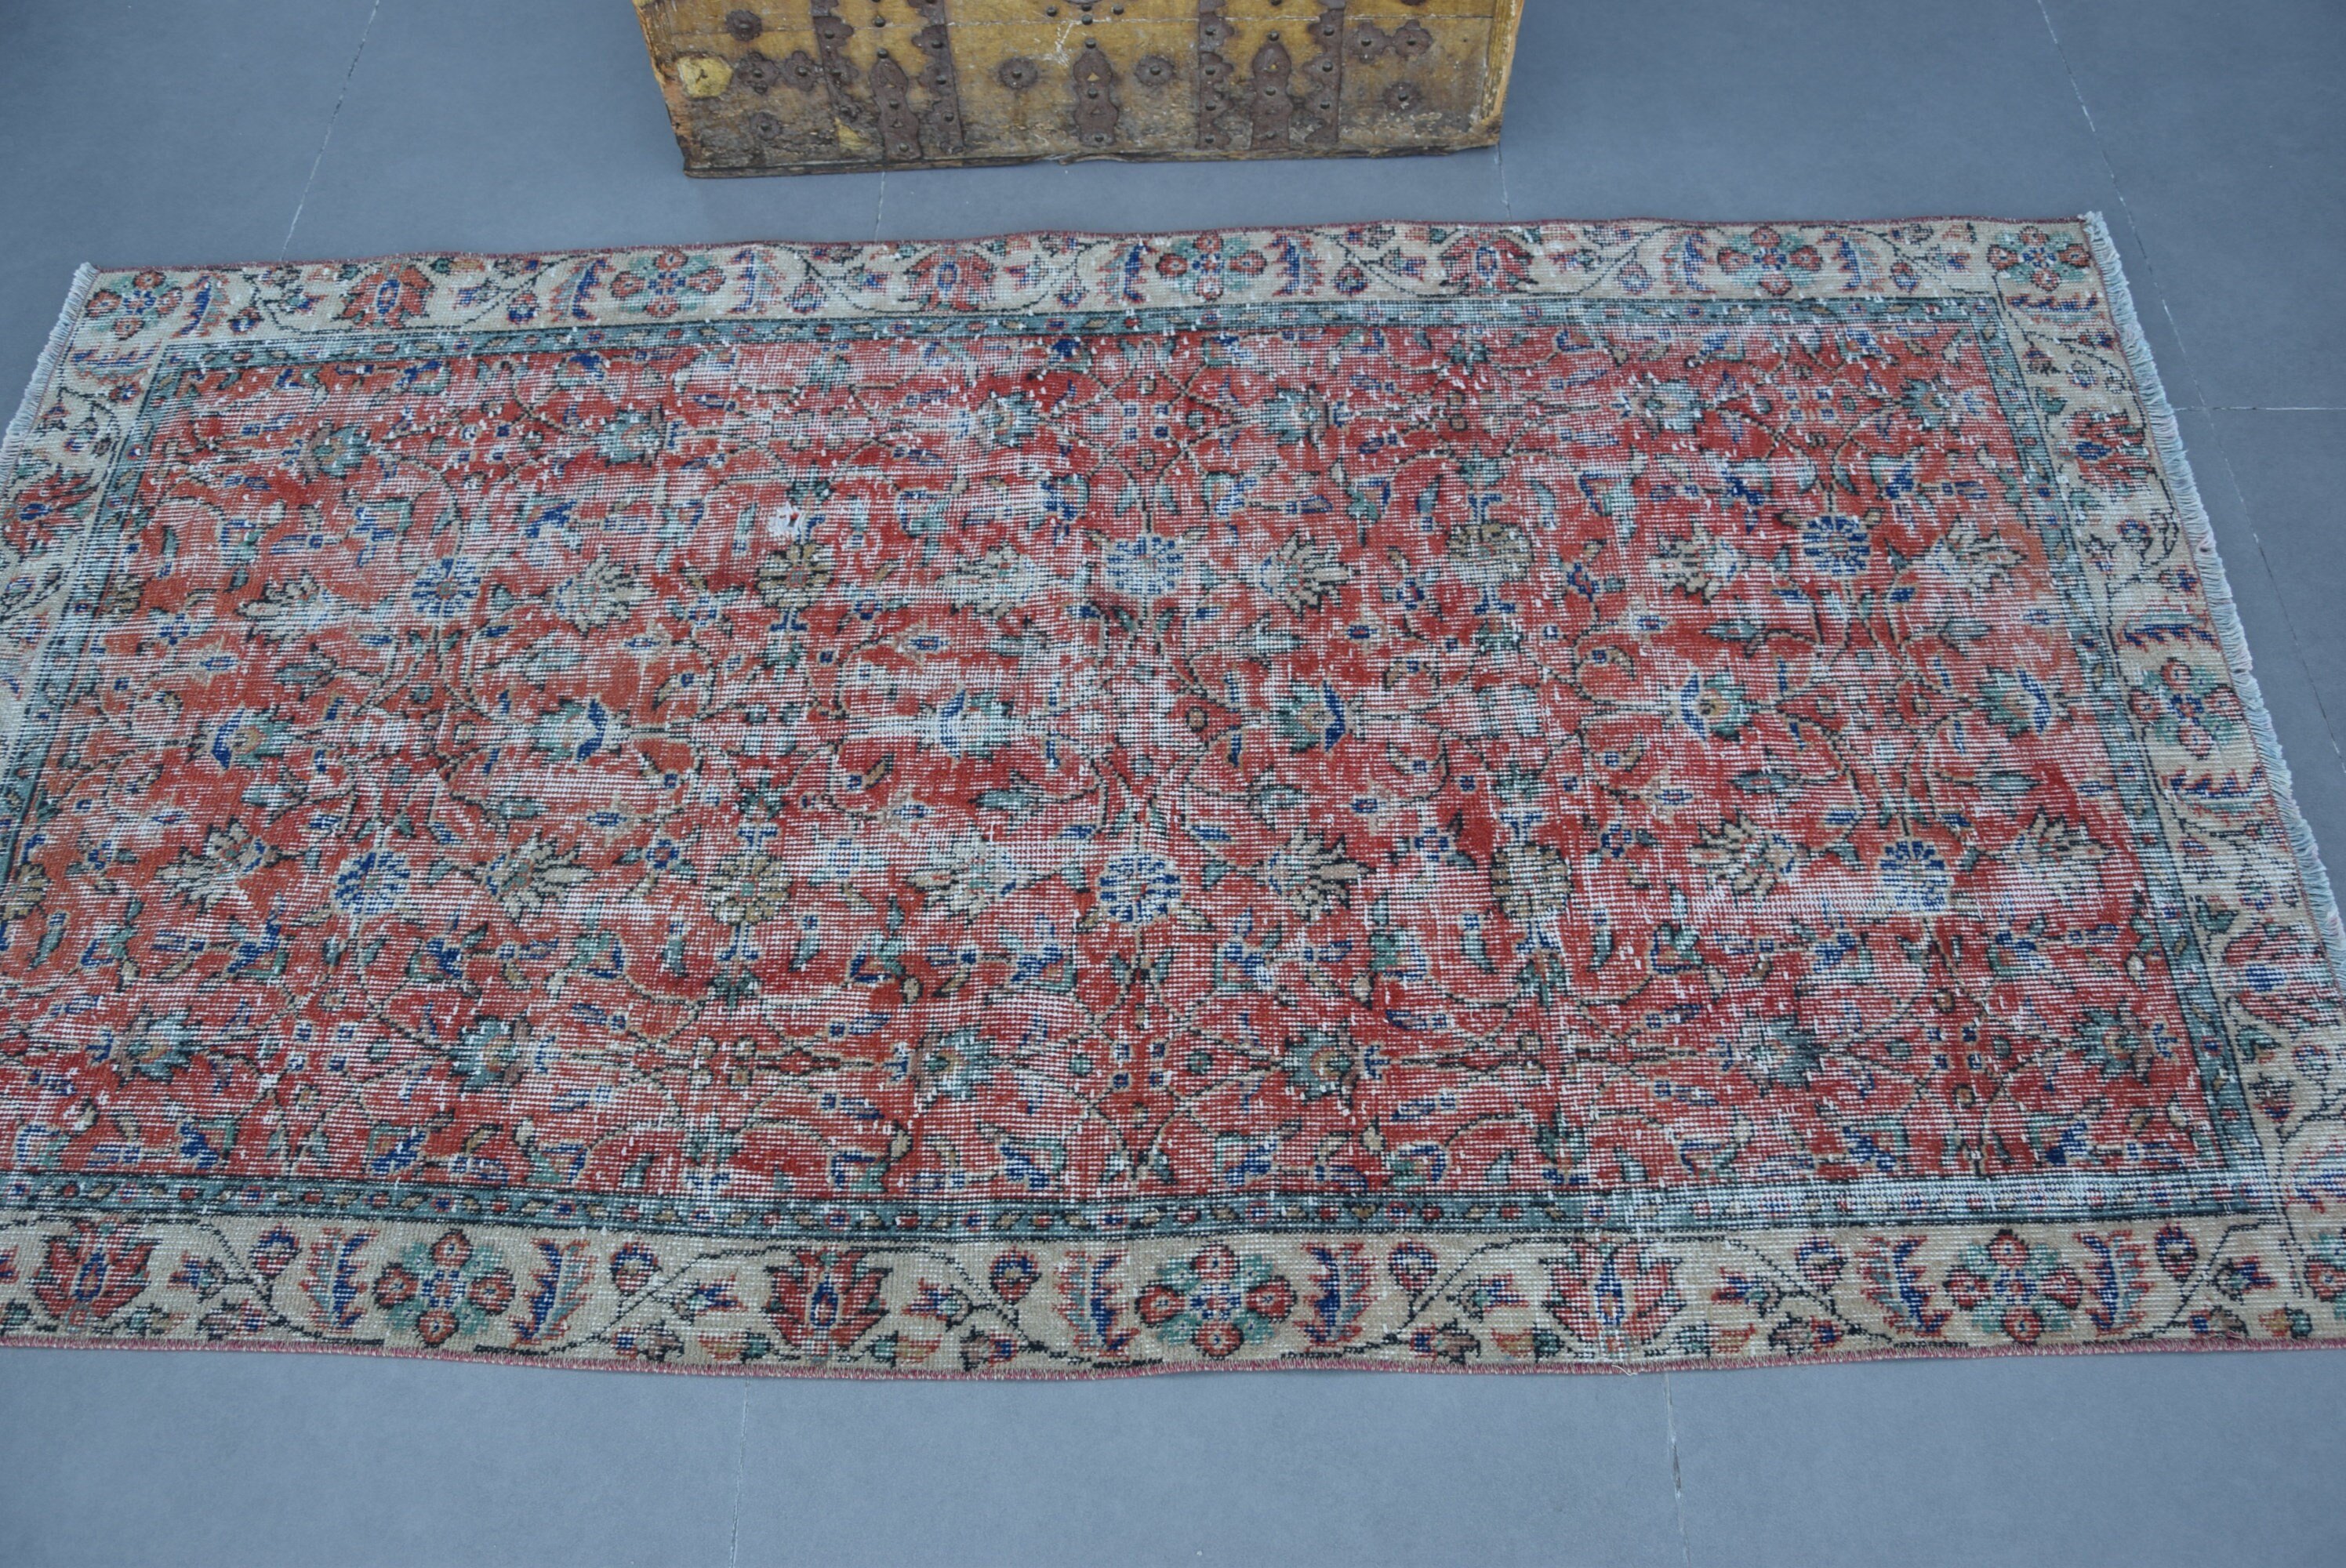 Bedroom Rugs, Turkish Rug, Oriental Rug, Antique Rug, Entry Rugs, Red Floor Rugs, Rugs for Kitchen, Vintage Rugs, 3.4x6.4 ft Accent Rugs